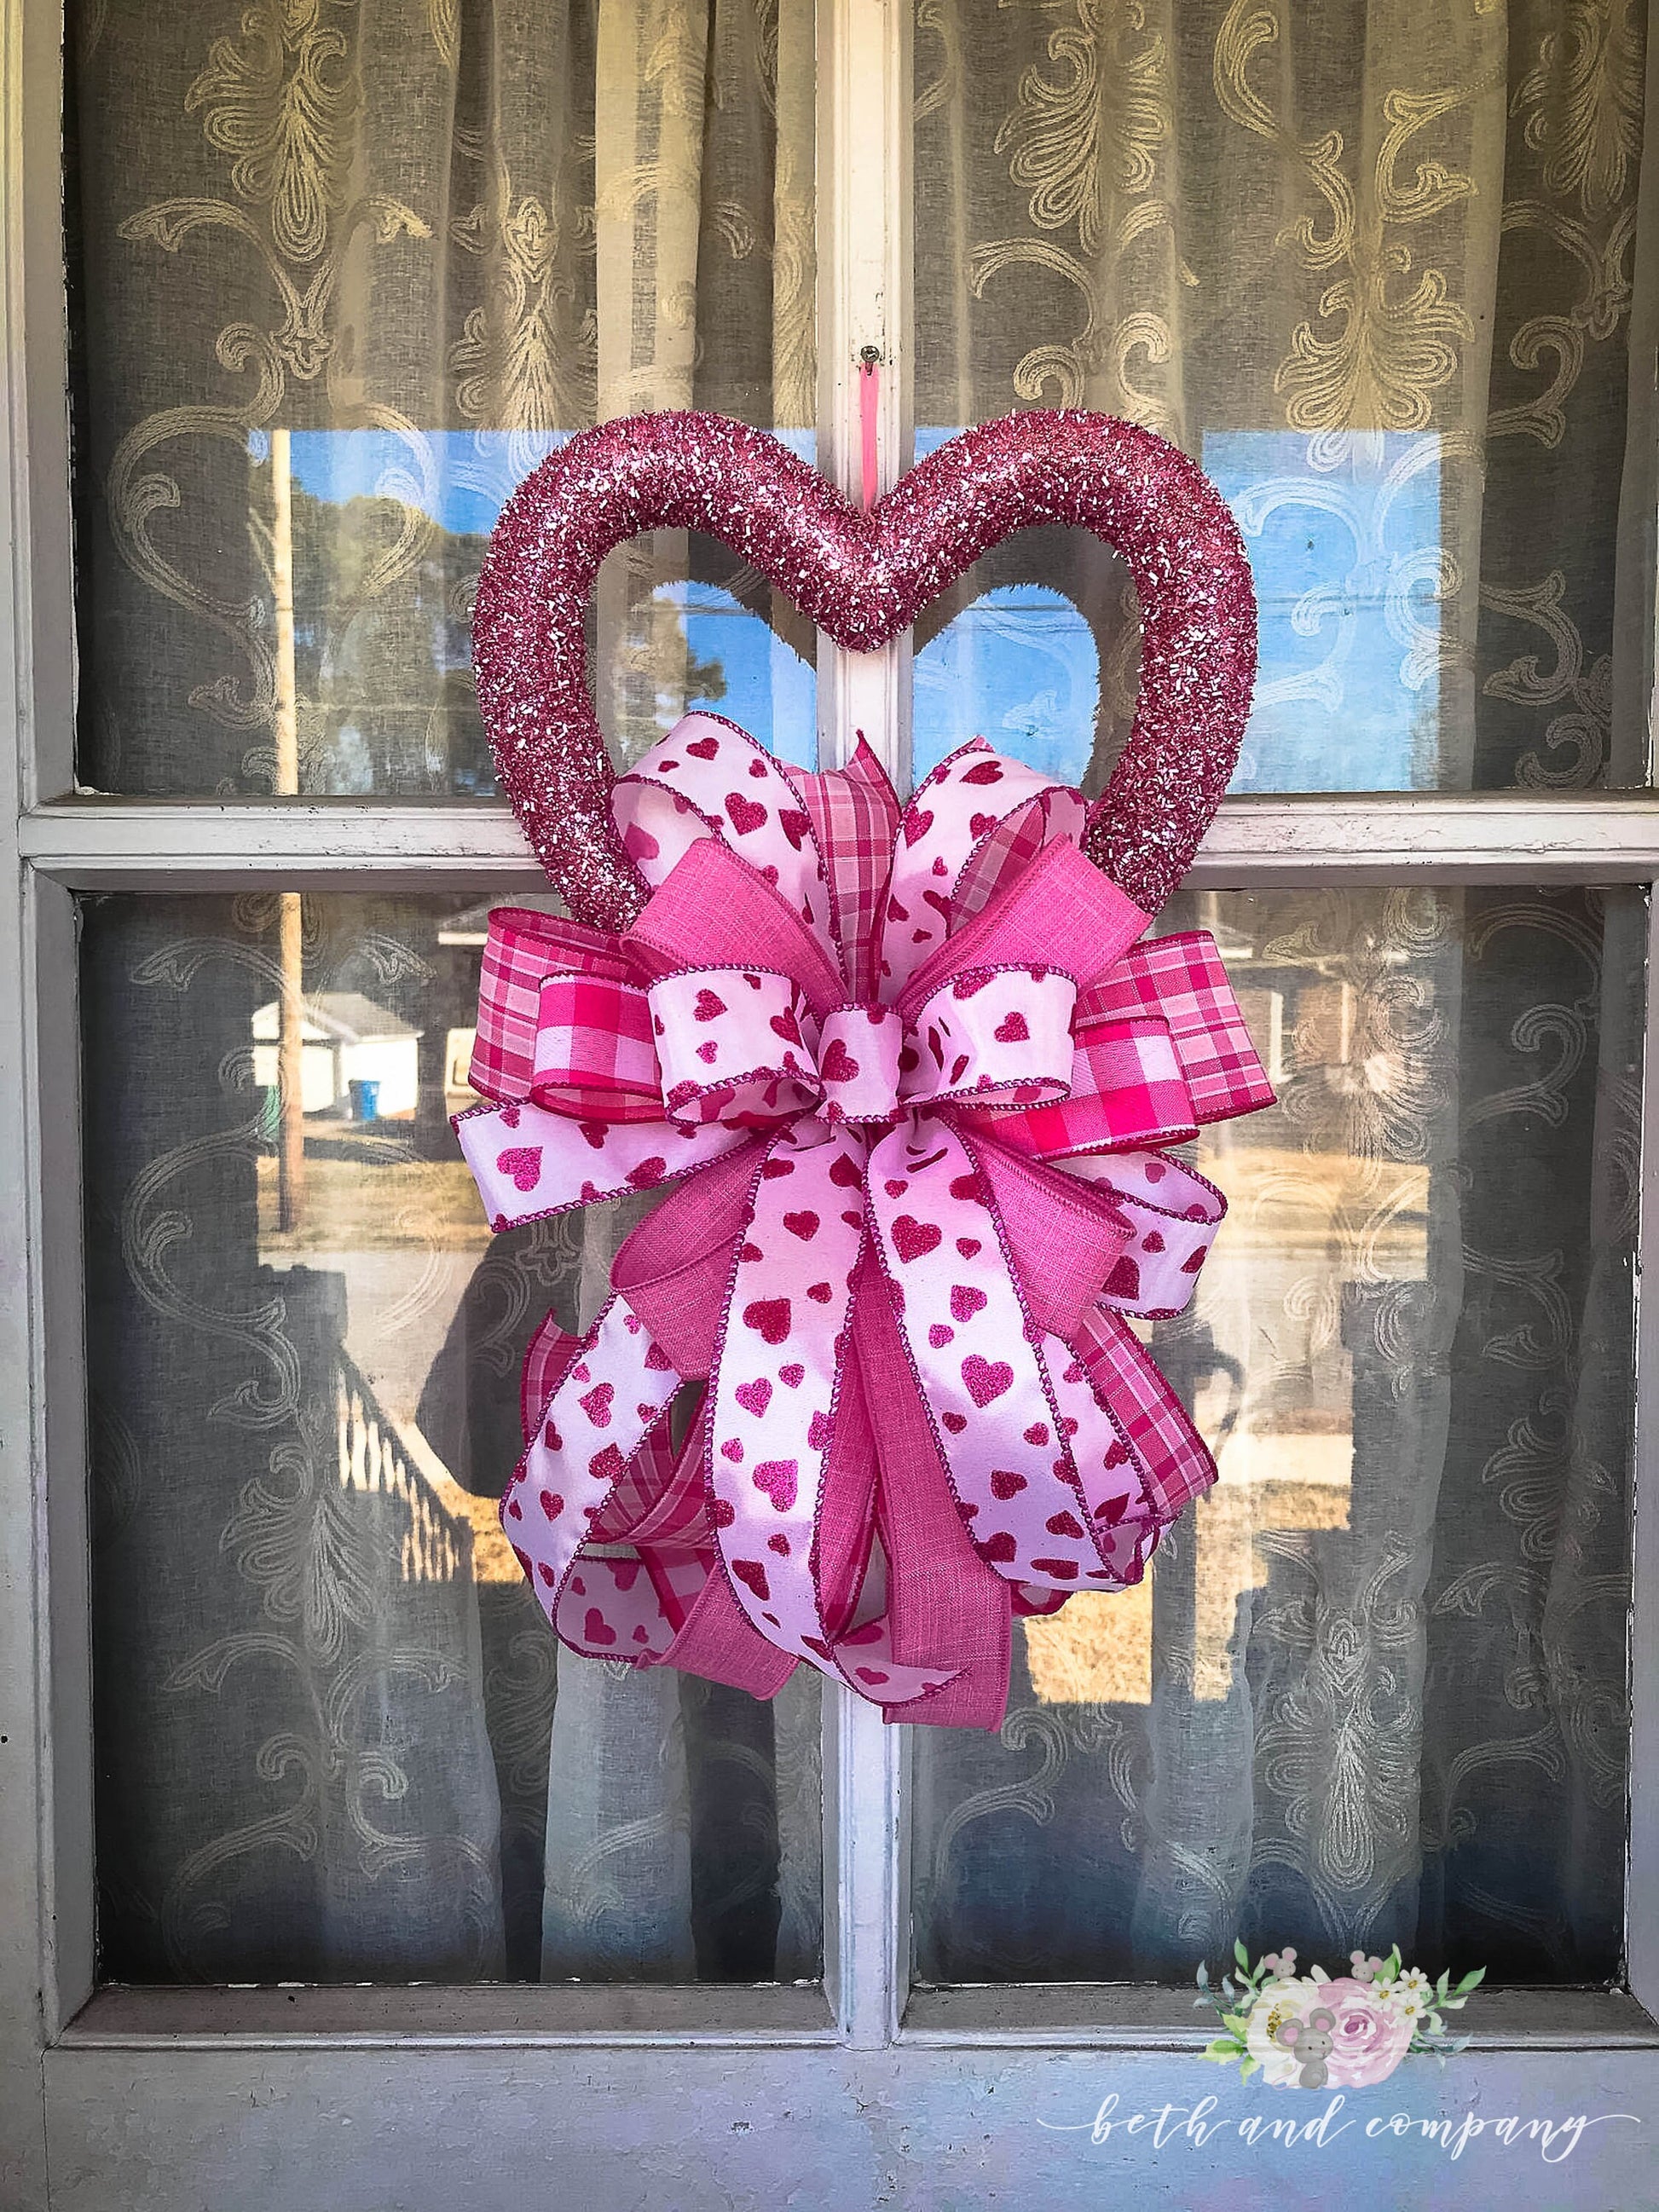  Heart Shaped Valentine's Day Wreath with Burlap Plaid